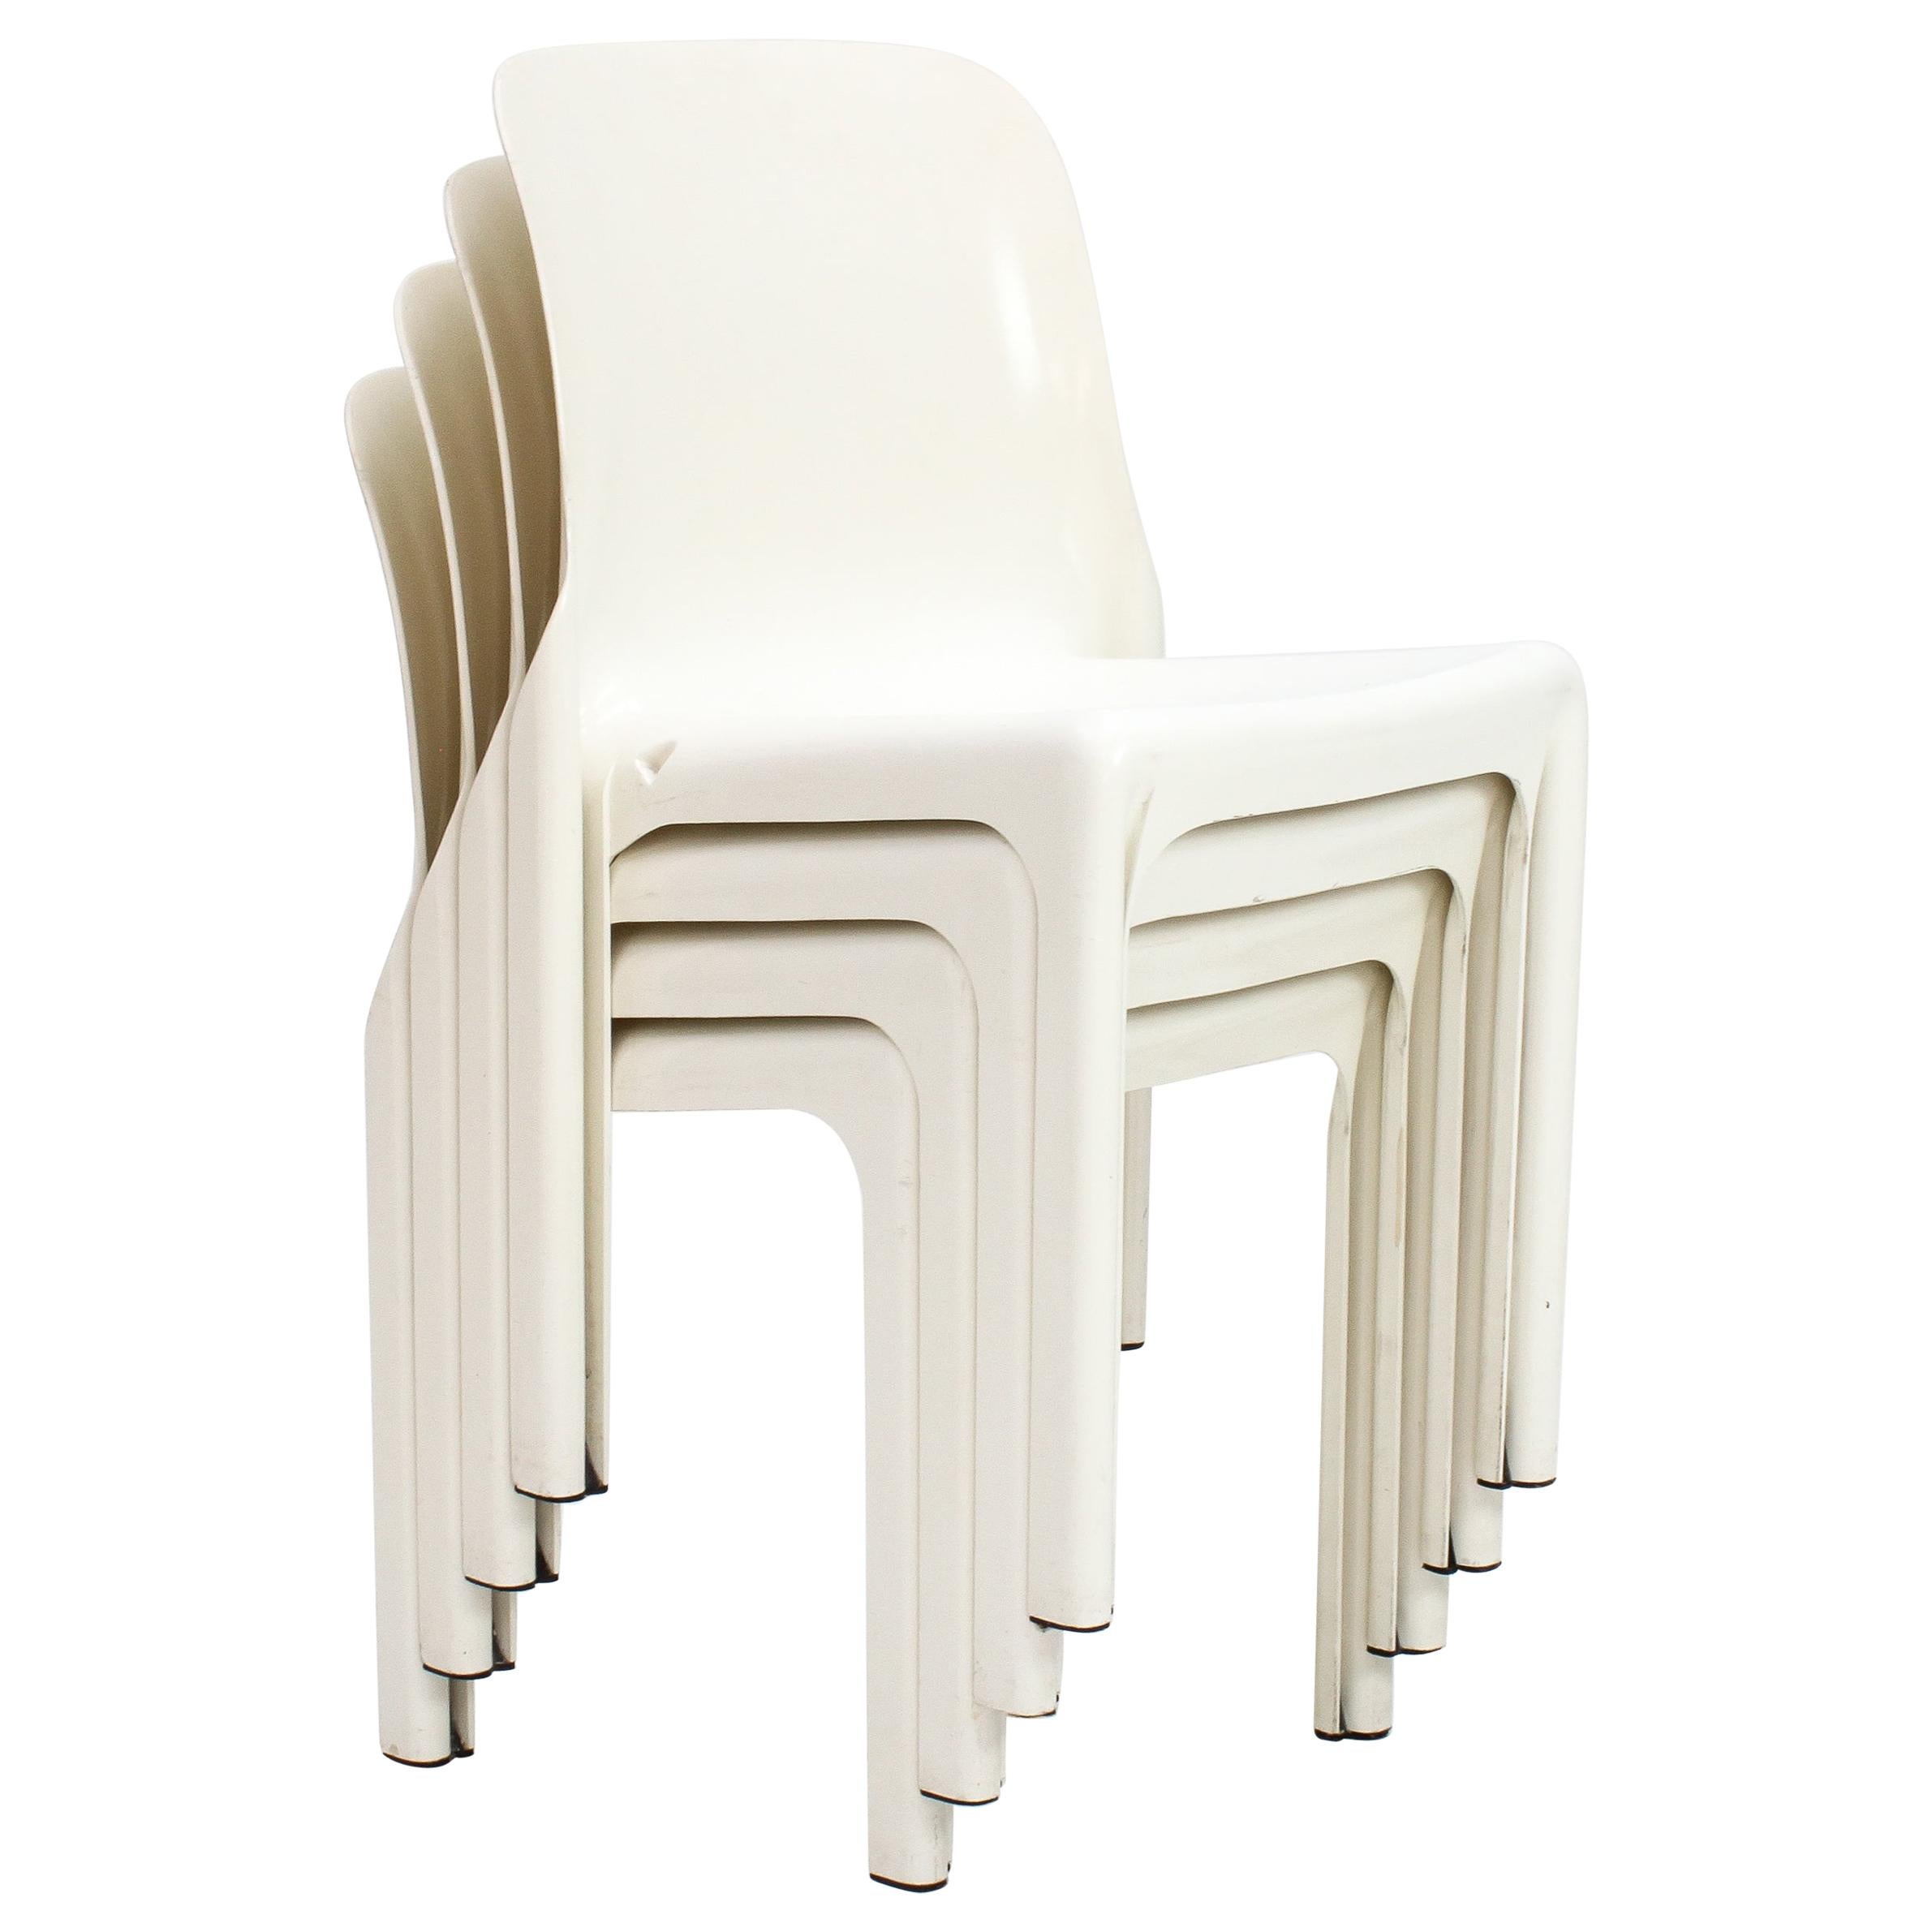 'Selene' Stacking Chairs in White by Vico Magistretti for Artemide, 1969